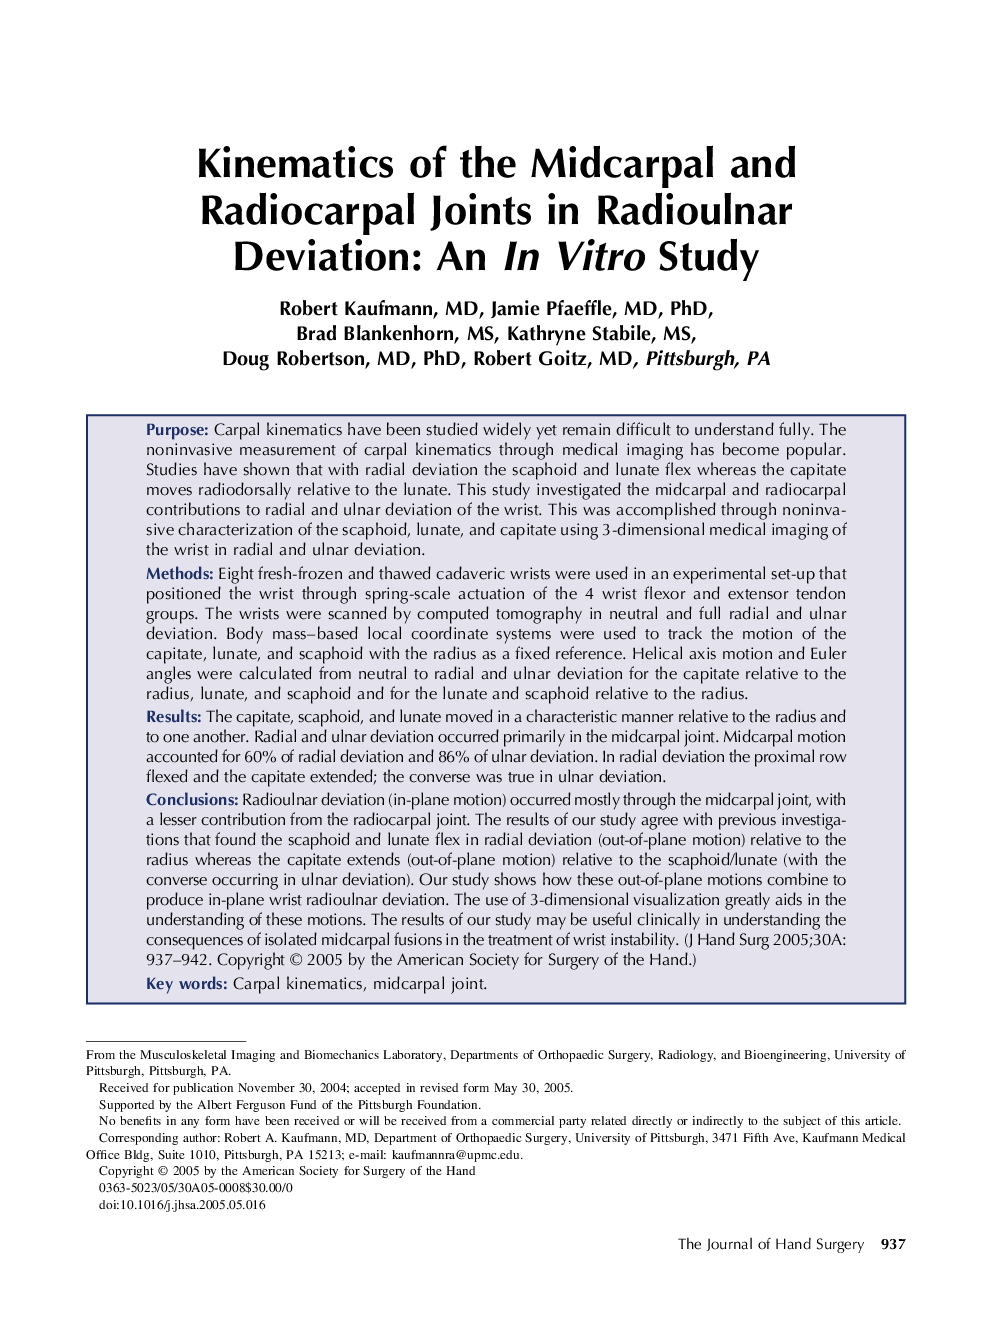 Kinematics of the Midcarpal and Radiocarpal Joints in Radioulnar Deviation: An In Vitro Study